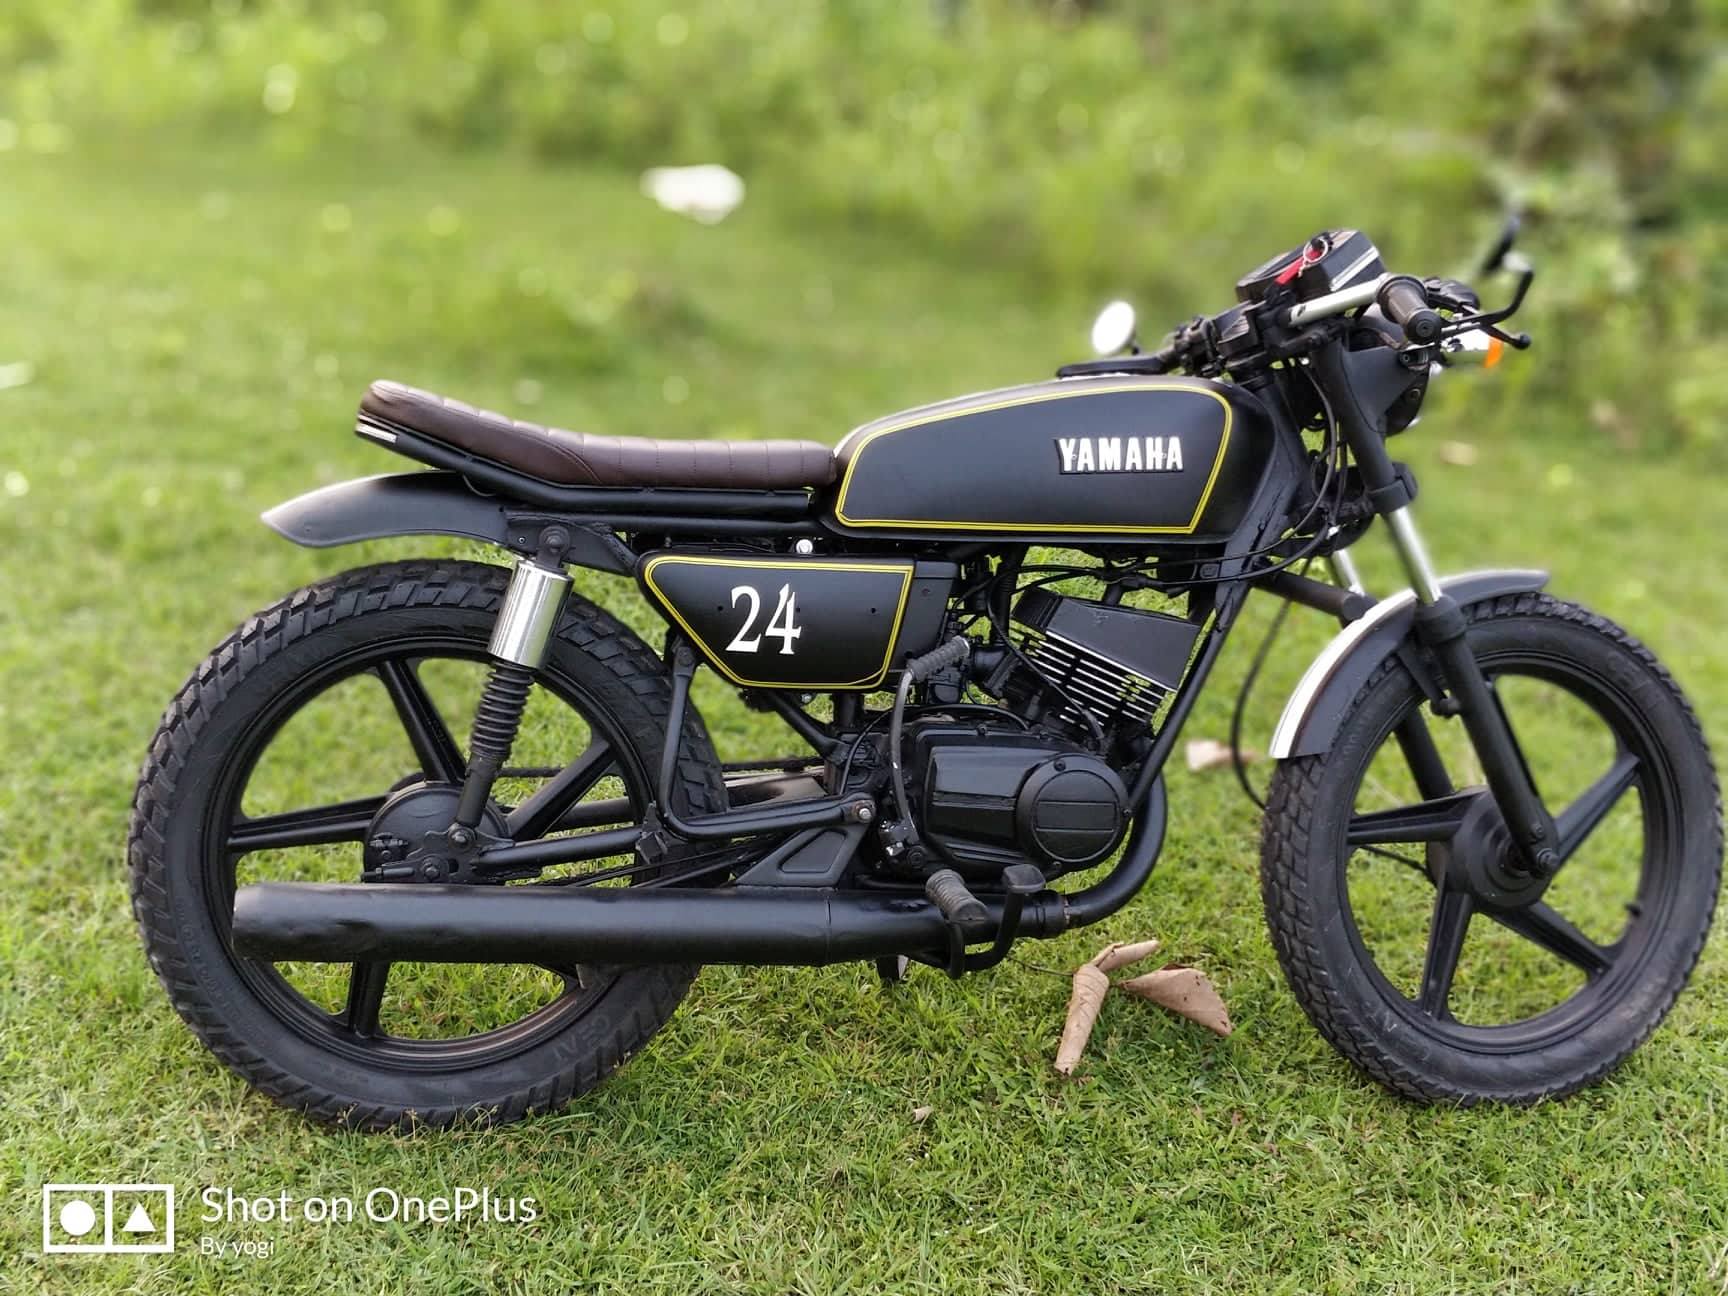 Top 10 Modified Yamaha RX100 Models in India - Must Check! - midground